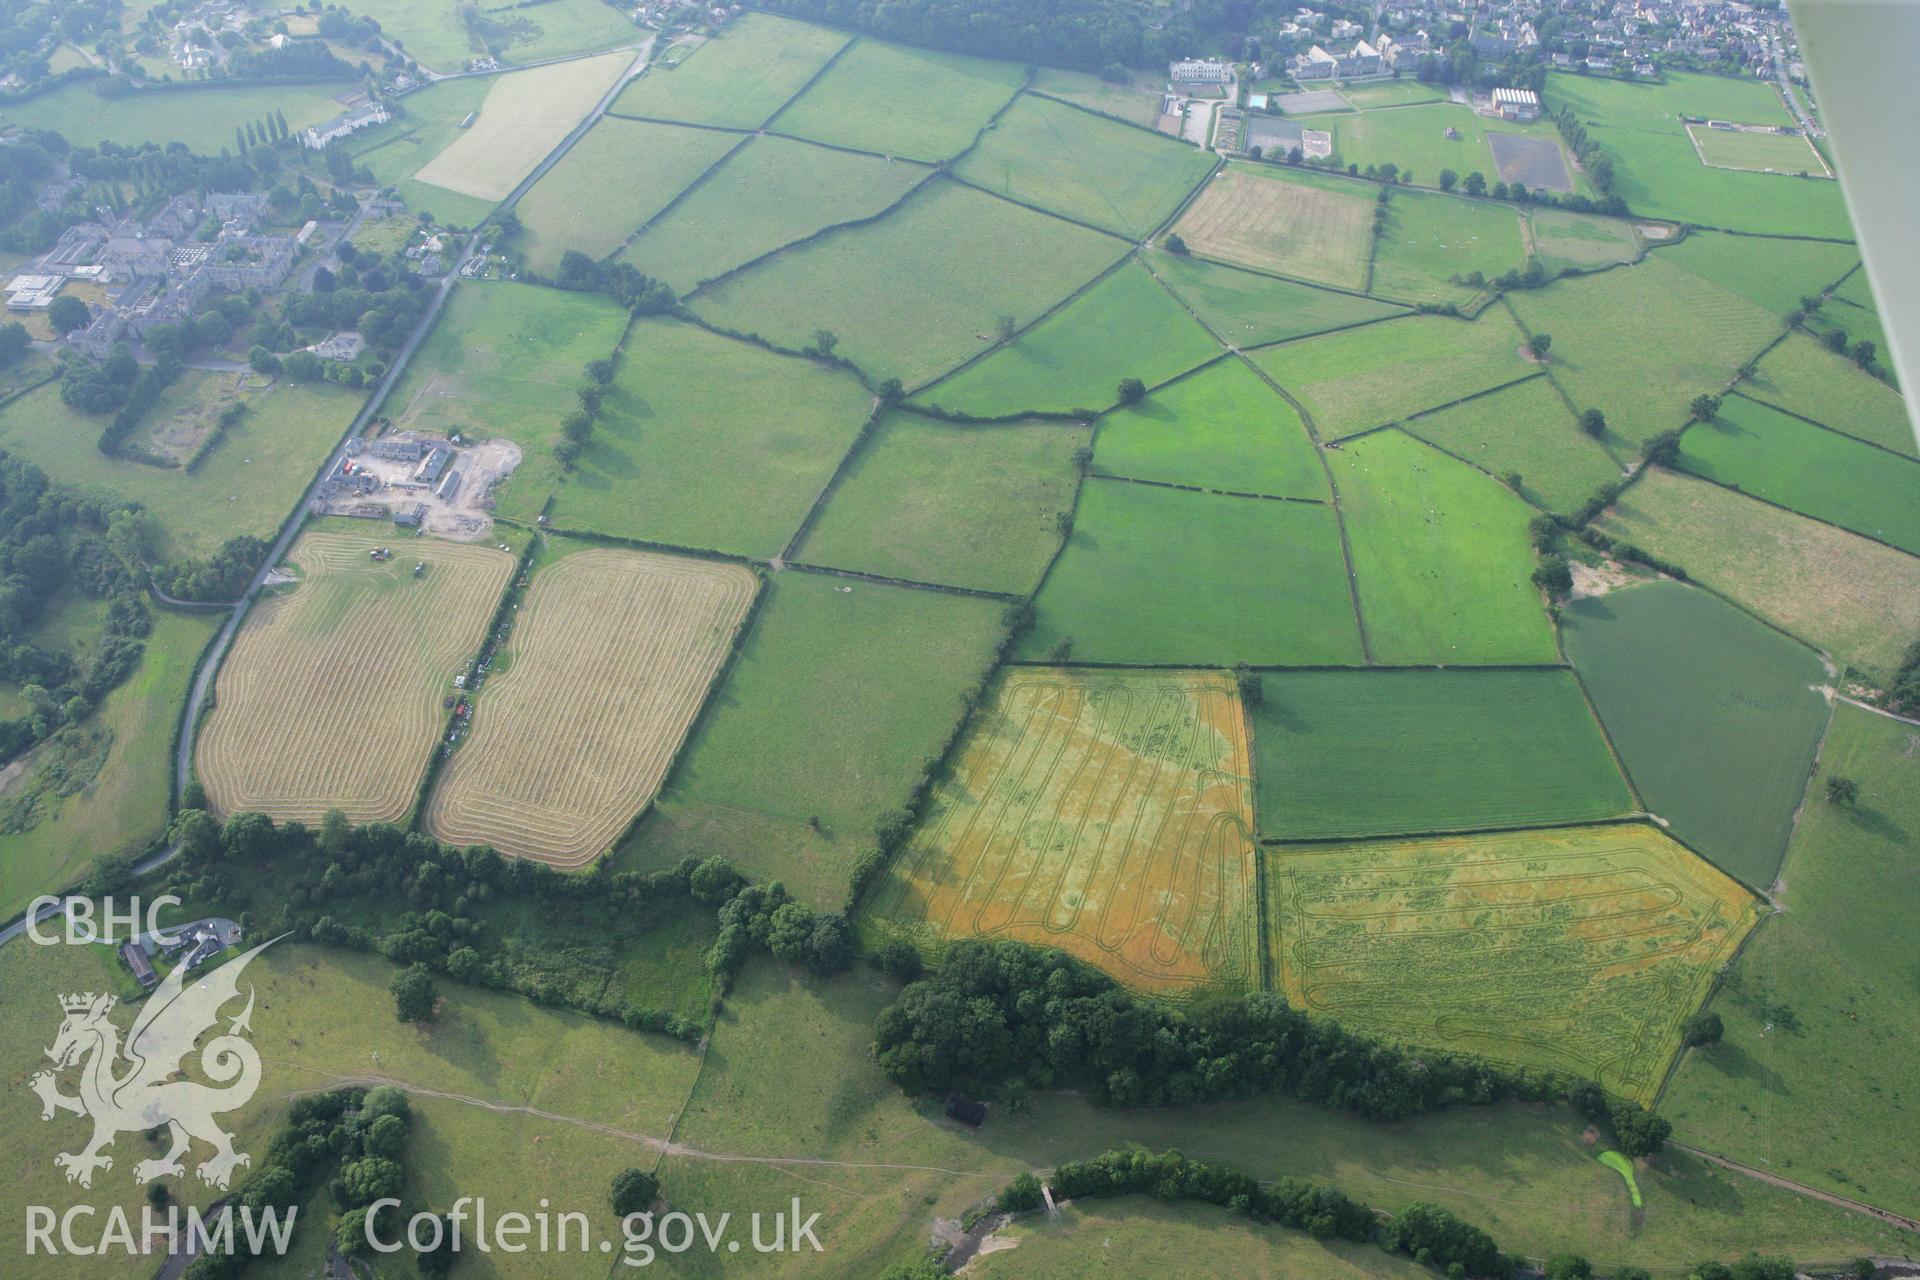 RCAHMW colour oblique photograph of Pennant Farm Cropmarks. Taken by Toby Driver on 24/07/2008.